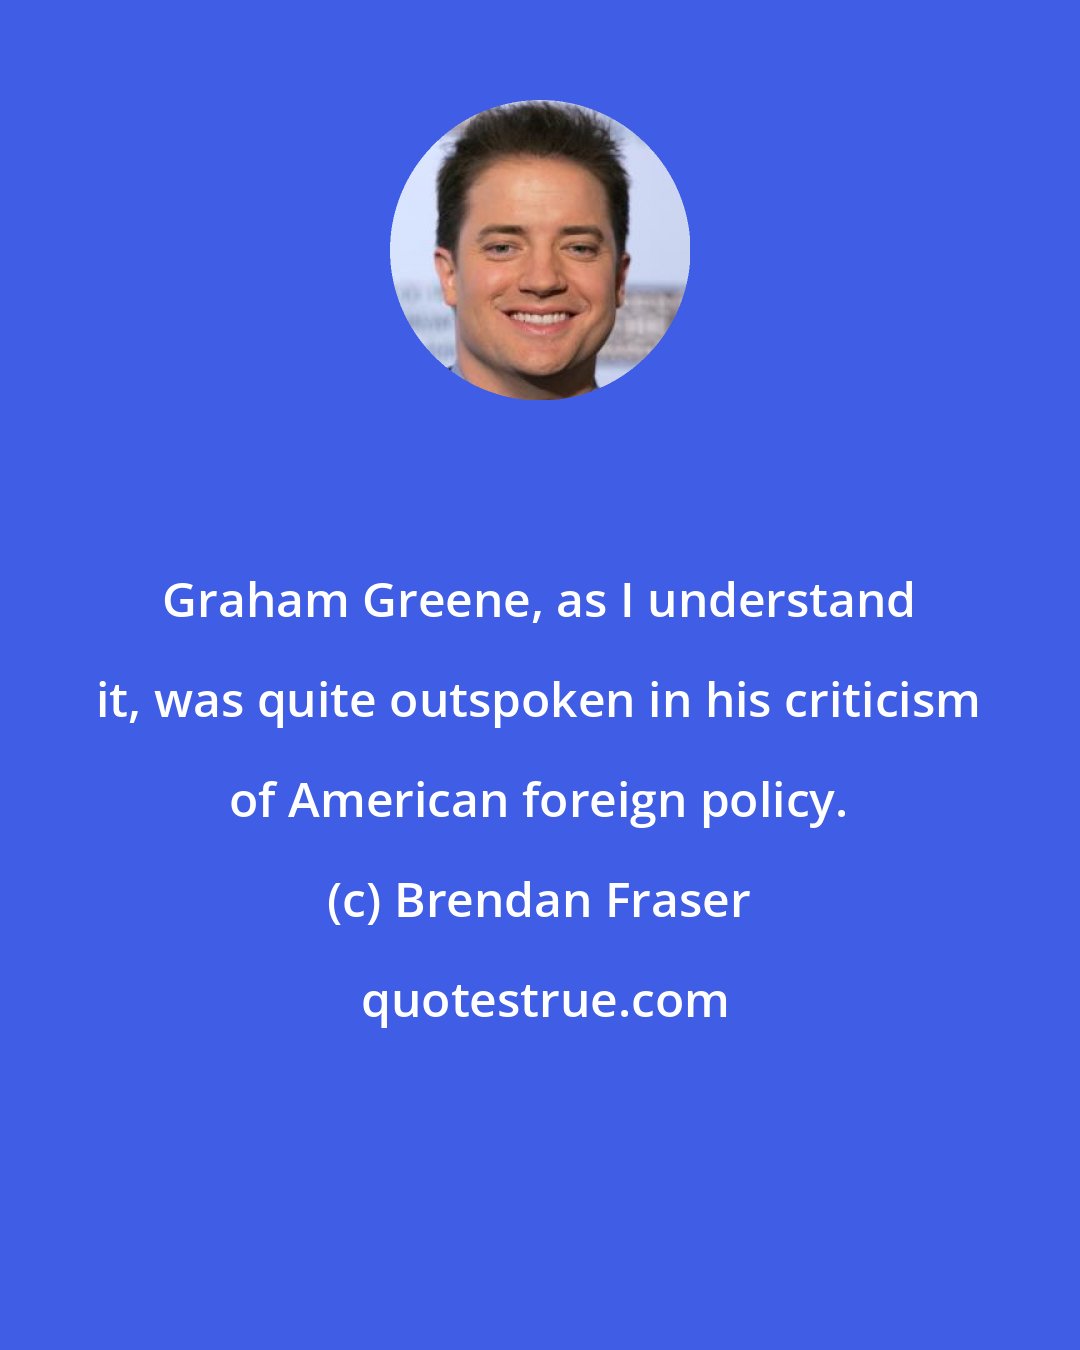 Brendan Fraser: Graham Greene, as I understand it, was quite outspoken in his criticism of American foreign policy.